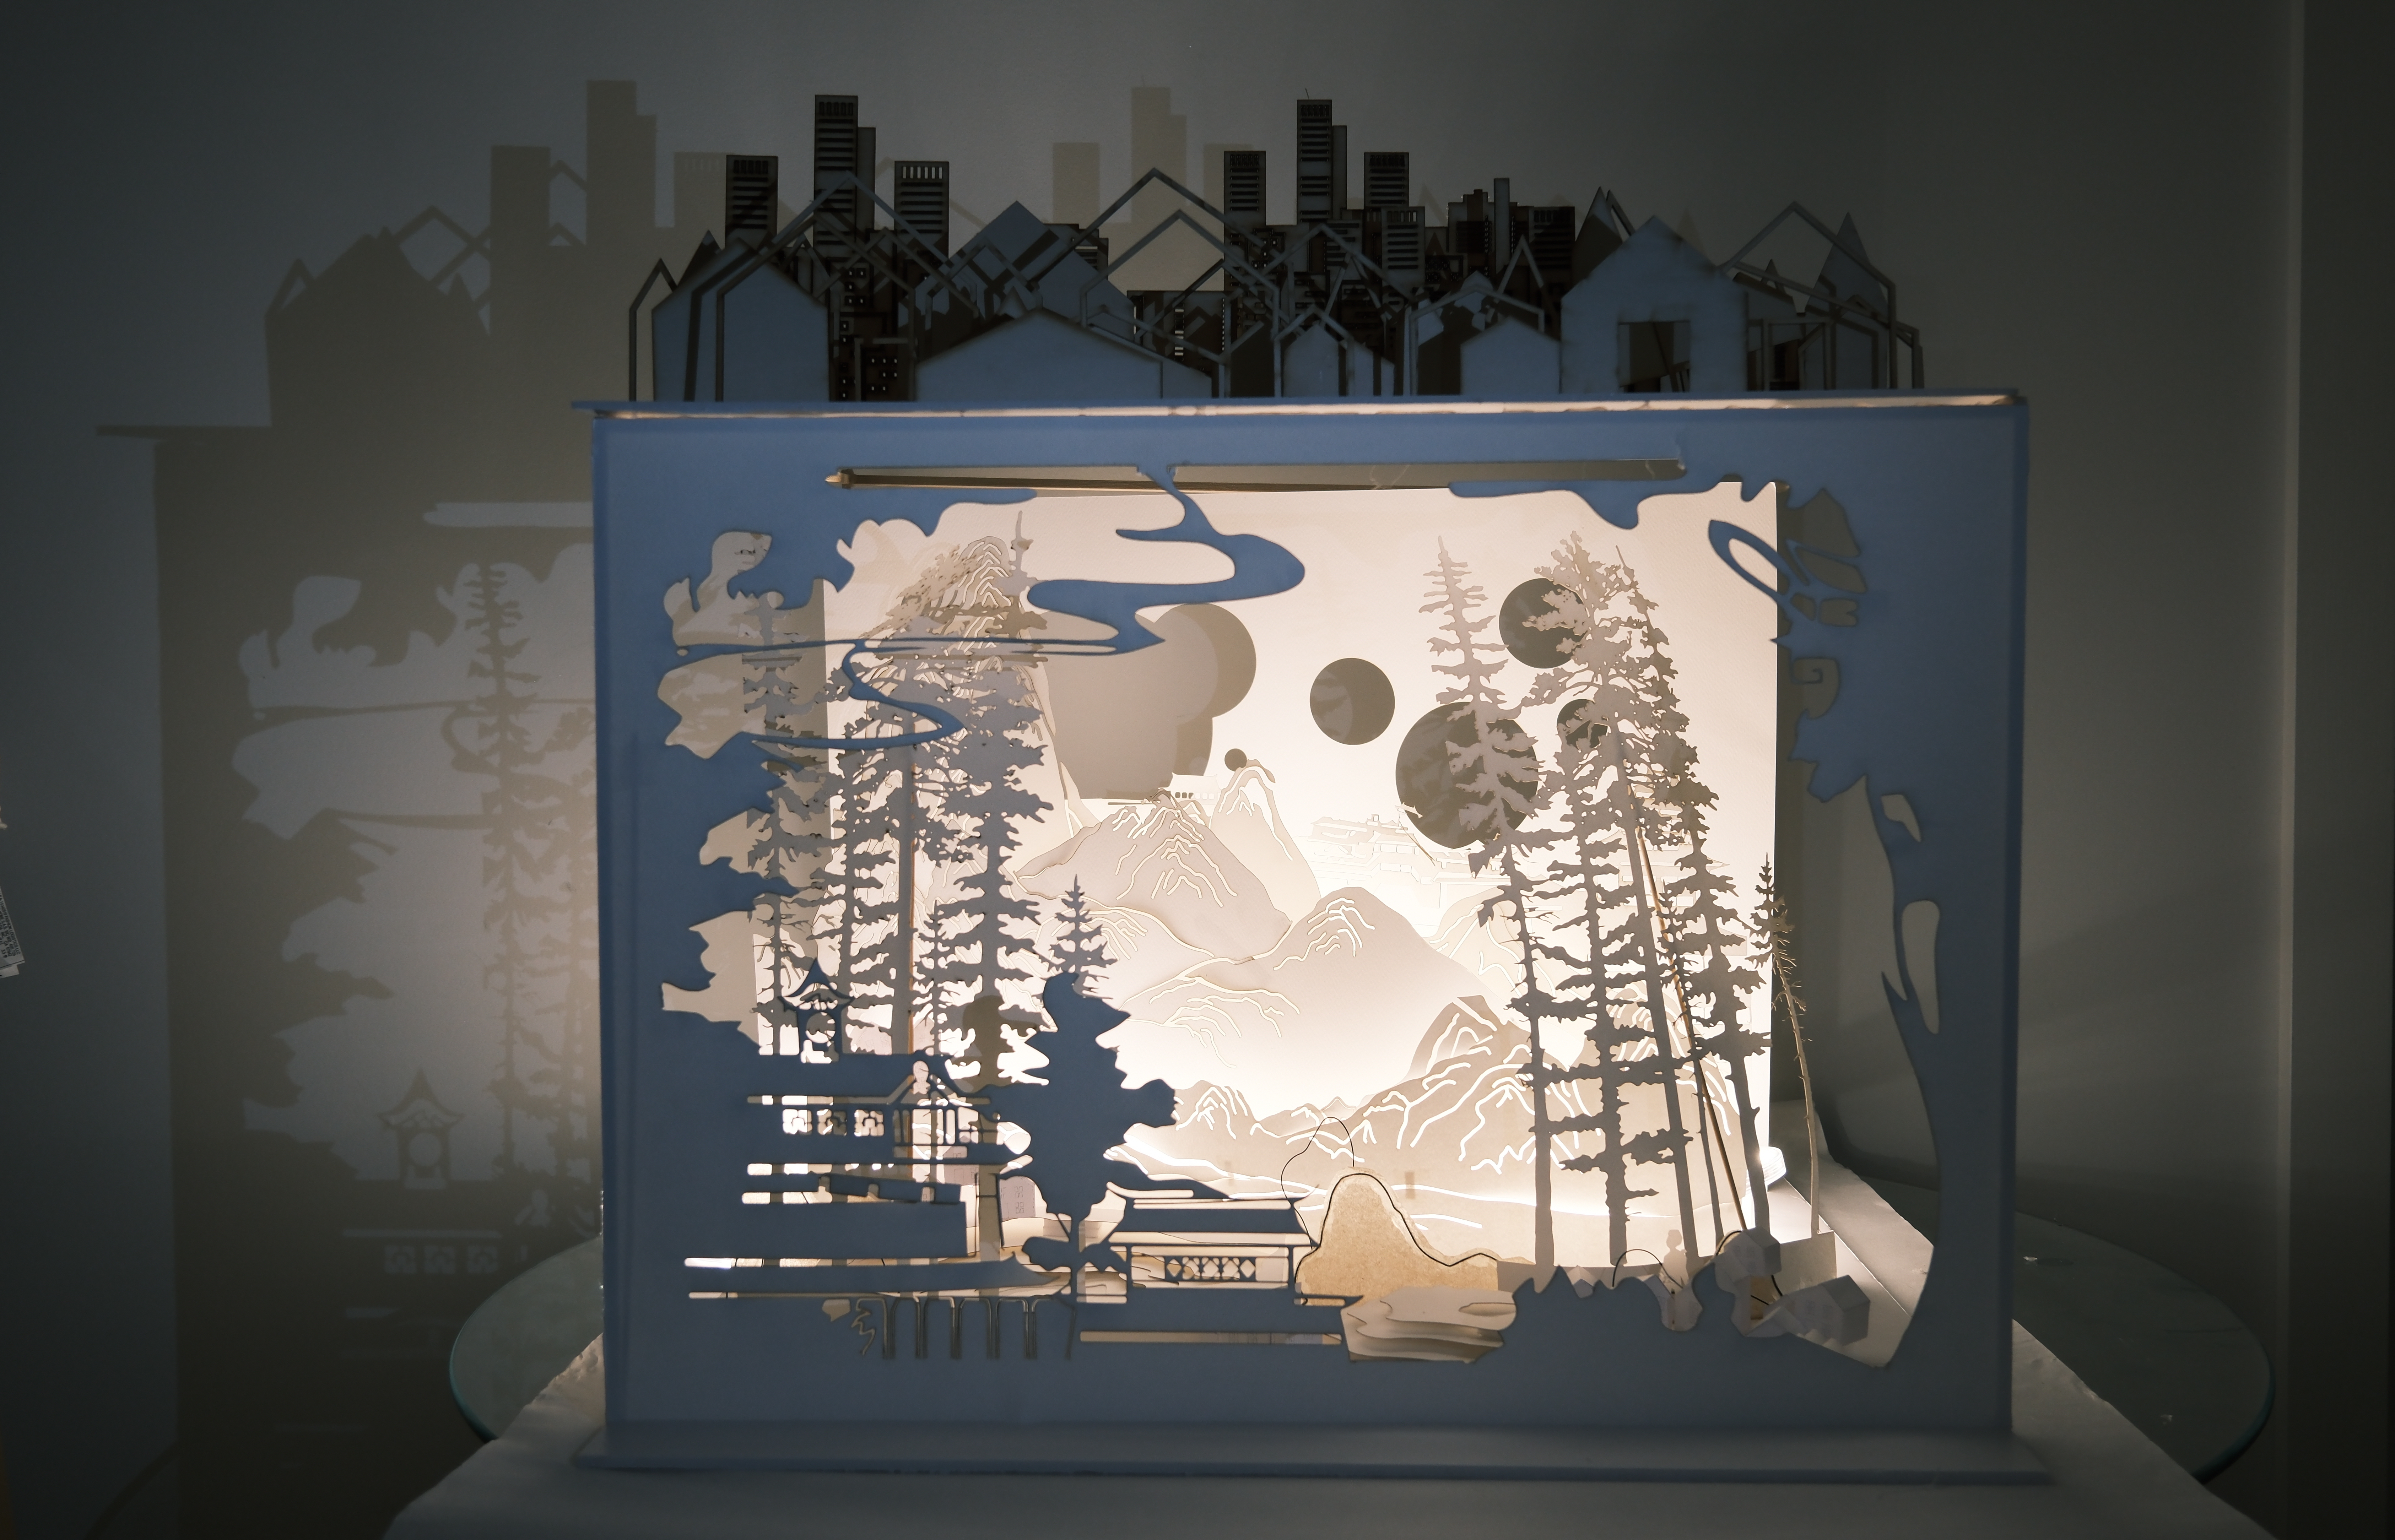 A paper cut out scene of landscape and city scape with shadow play on wall behind